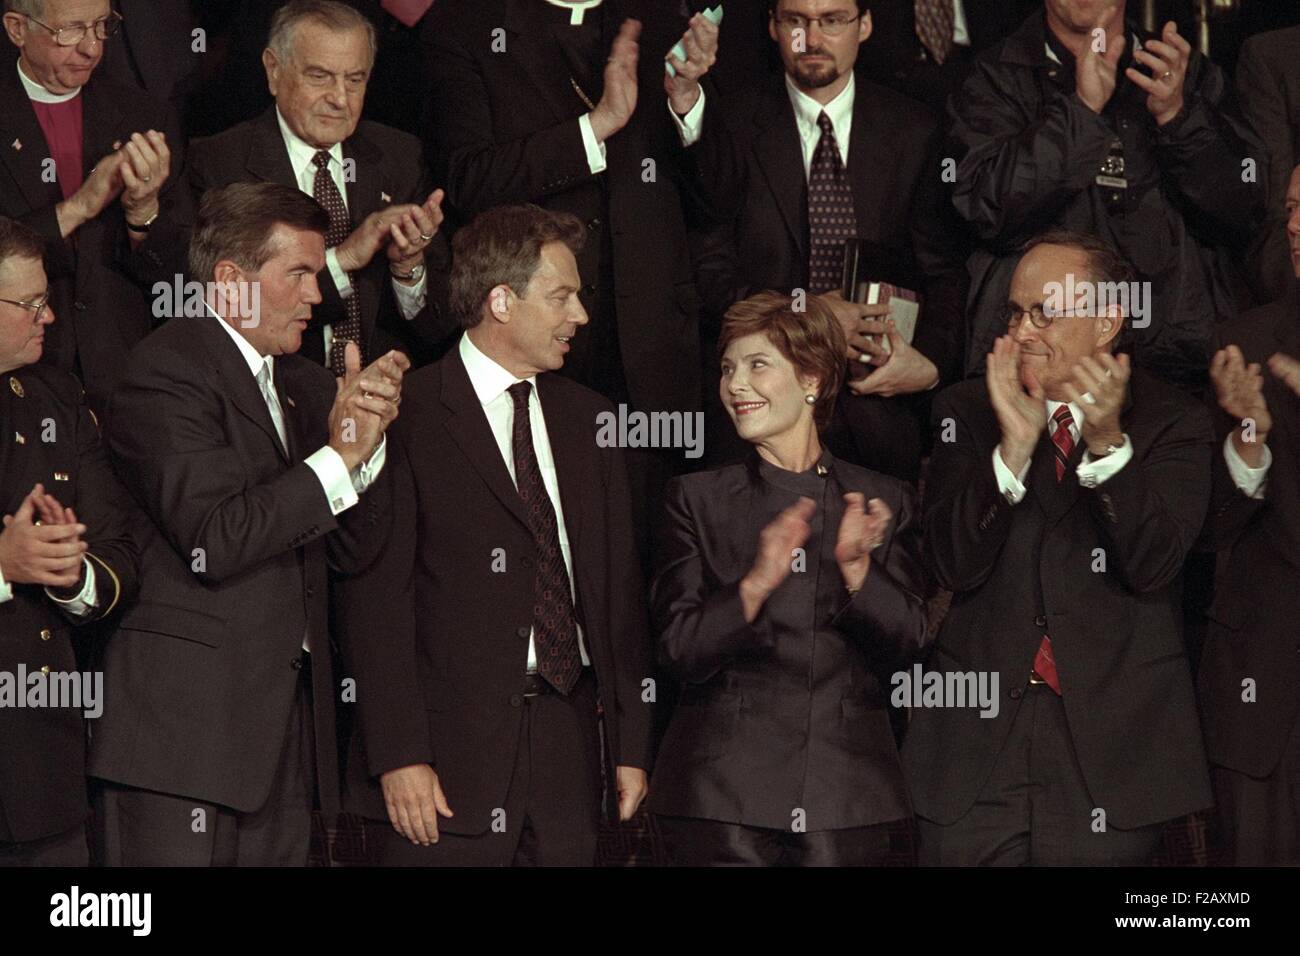 First Lady Laura Bush with Tom Ridge, PM Tony Blair, and NYC Mayor Rudy Giuliani. All three men were mentioned in President George W. Bush's address in which he identified Al Qaeda's responsibility and the Taliban government of Afghanistan as their abettor. Sept. 20, 2001. (BSLOC 2015 2 165) Stock Photo